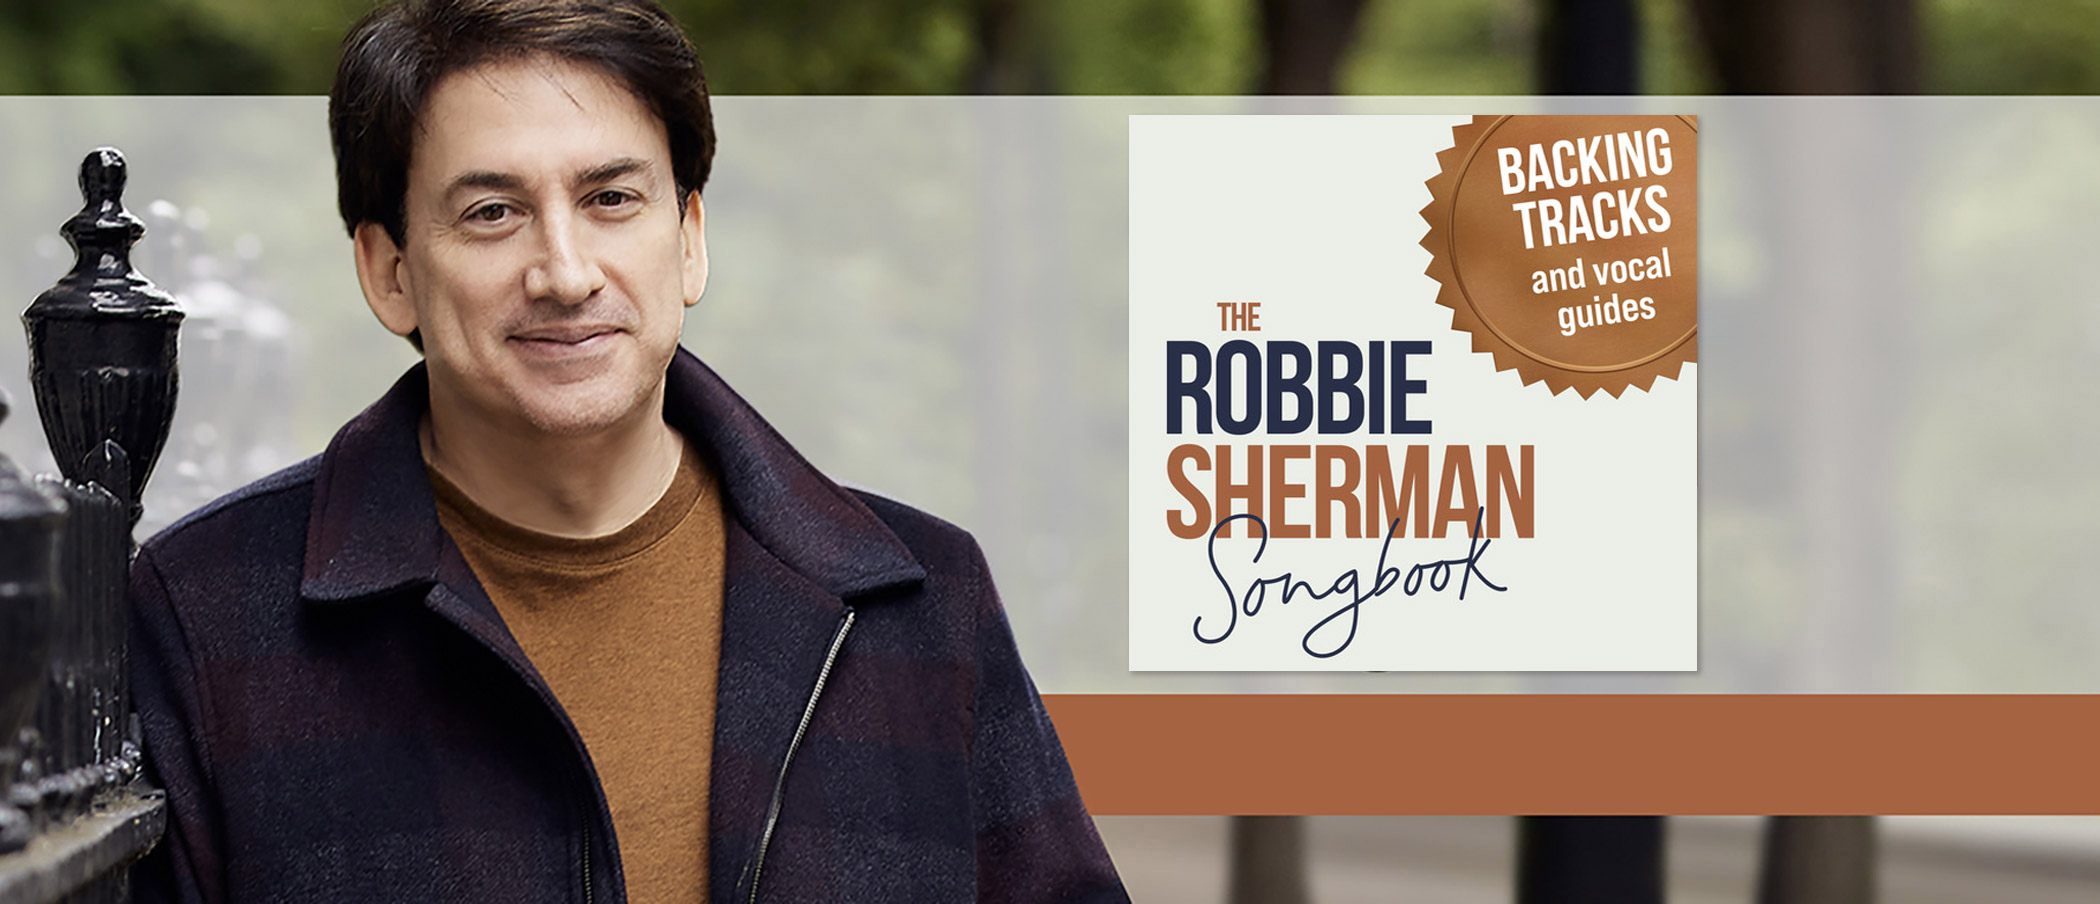 The Robbie Sherman Songbook: Backing Tracks and Vocal Guides